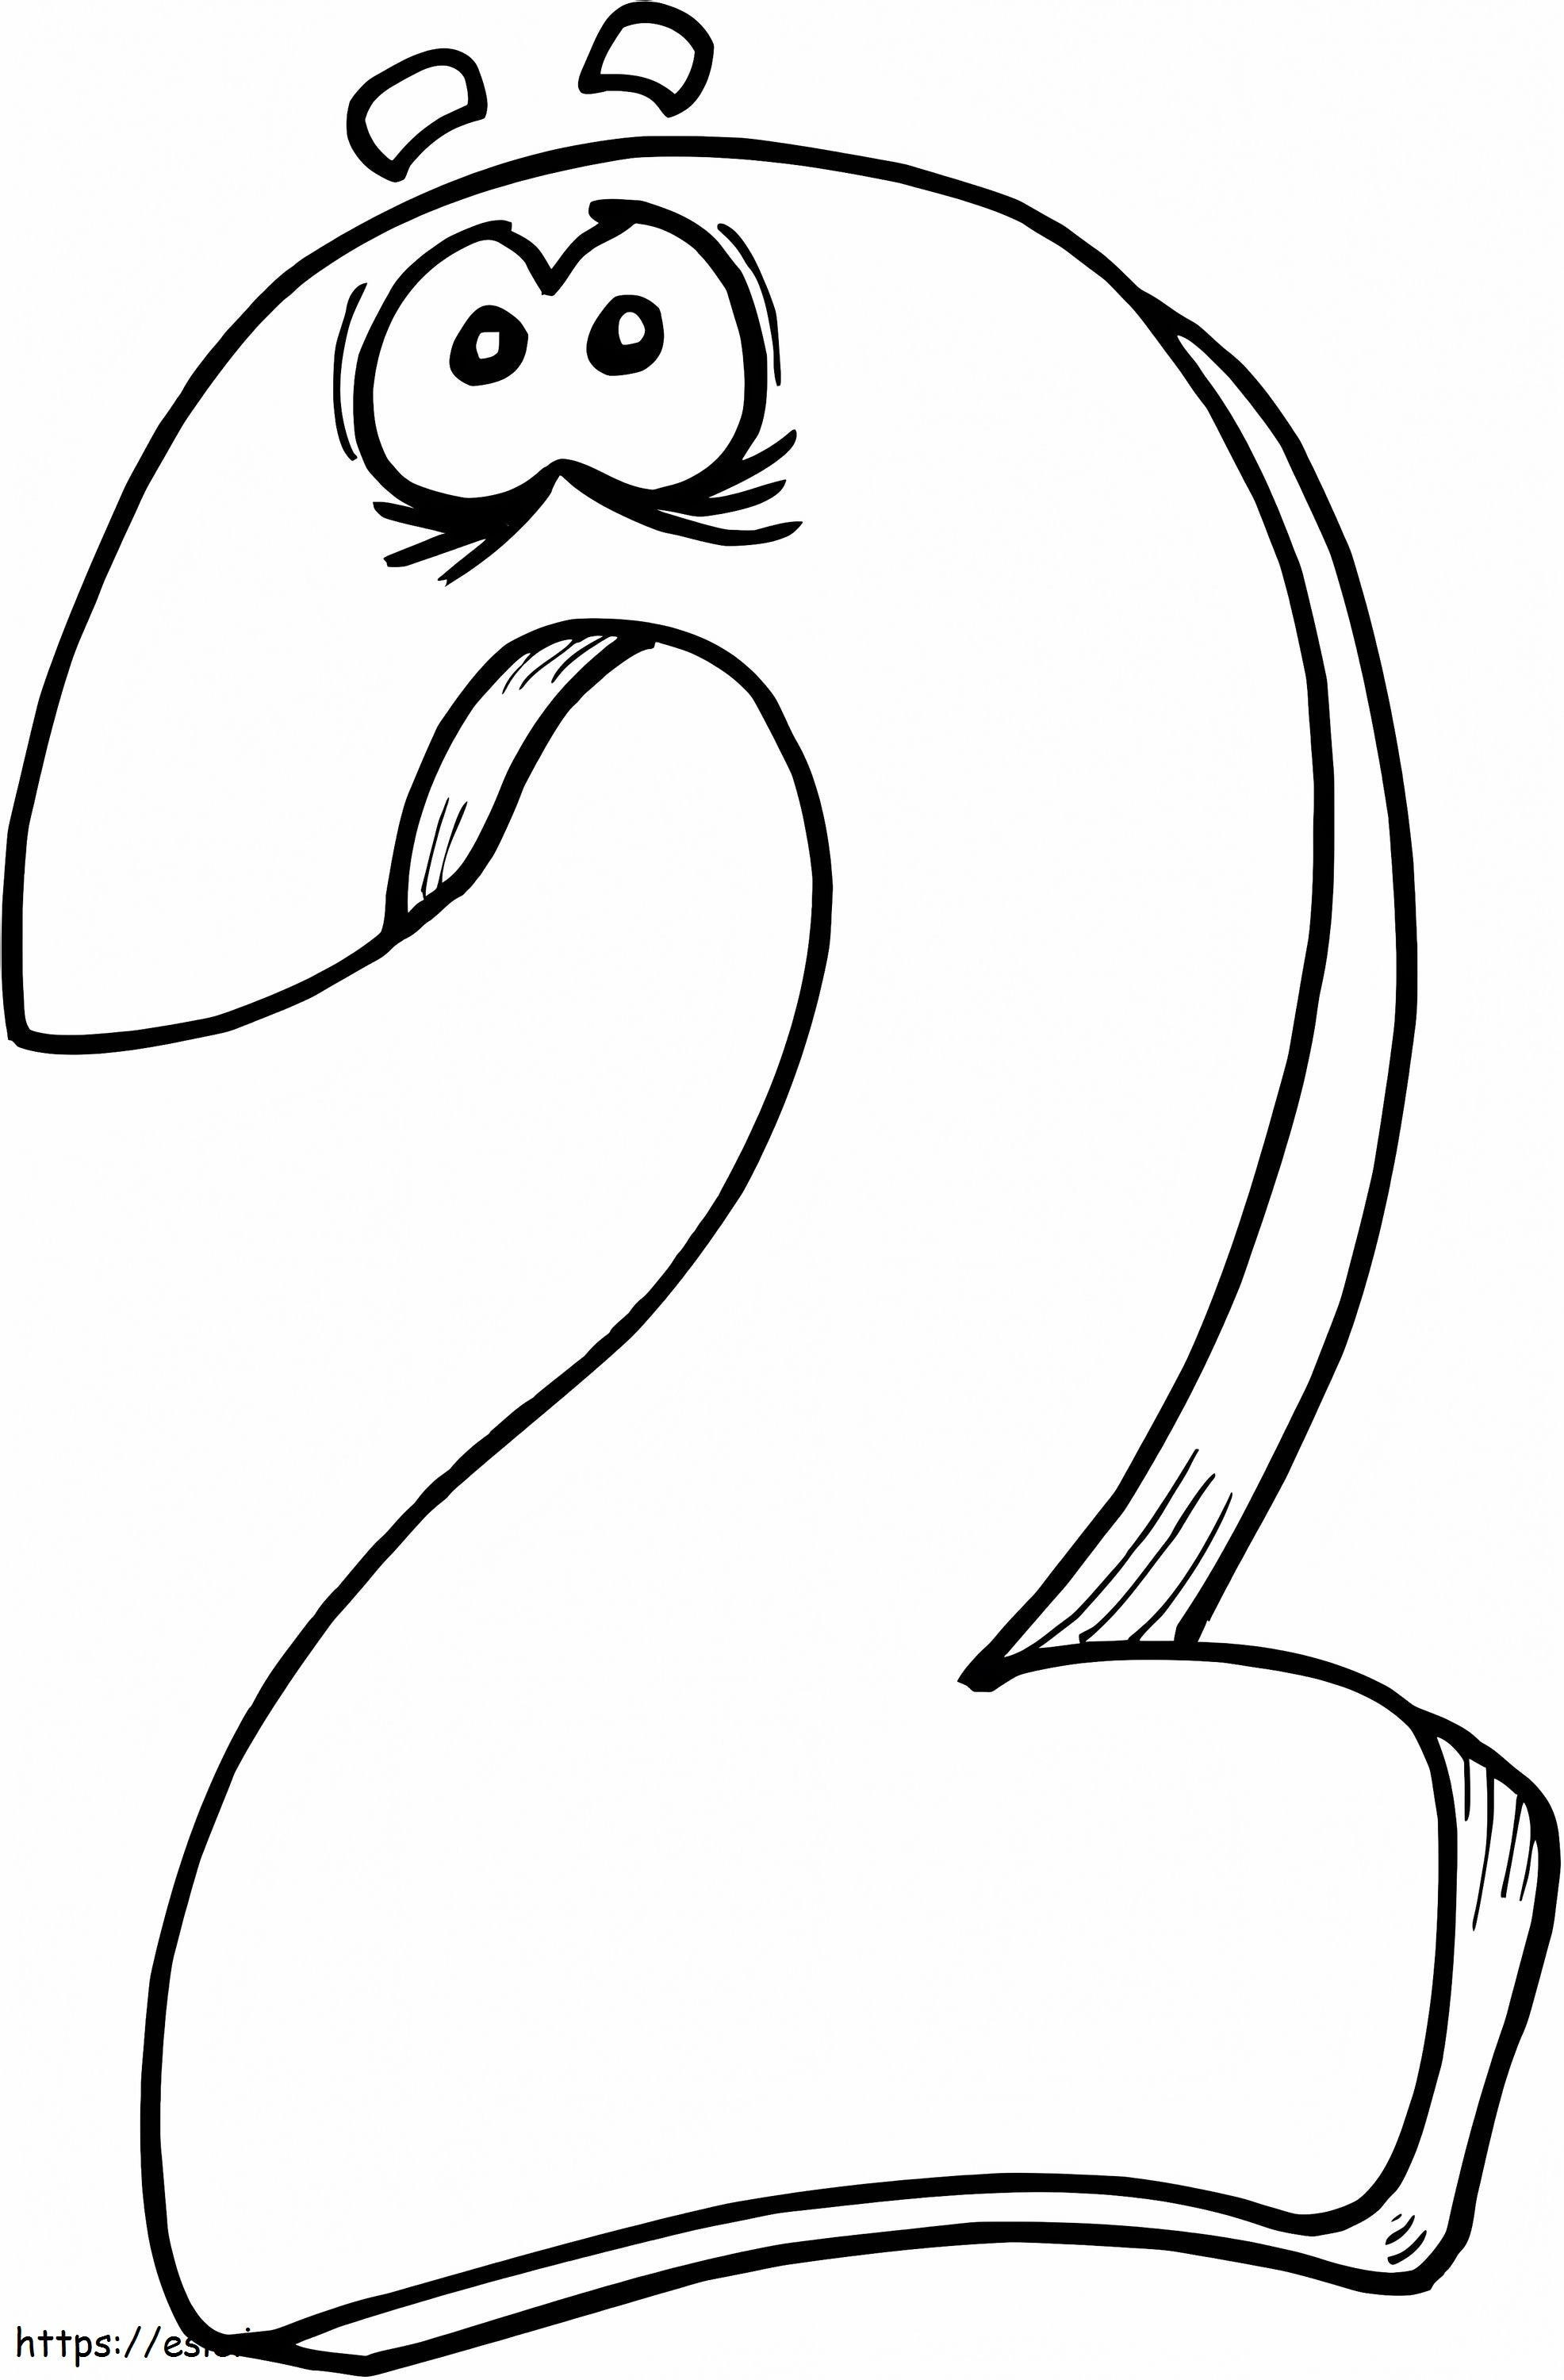 Sad Number 2 coloring page